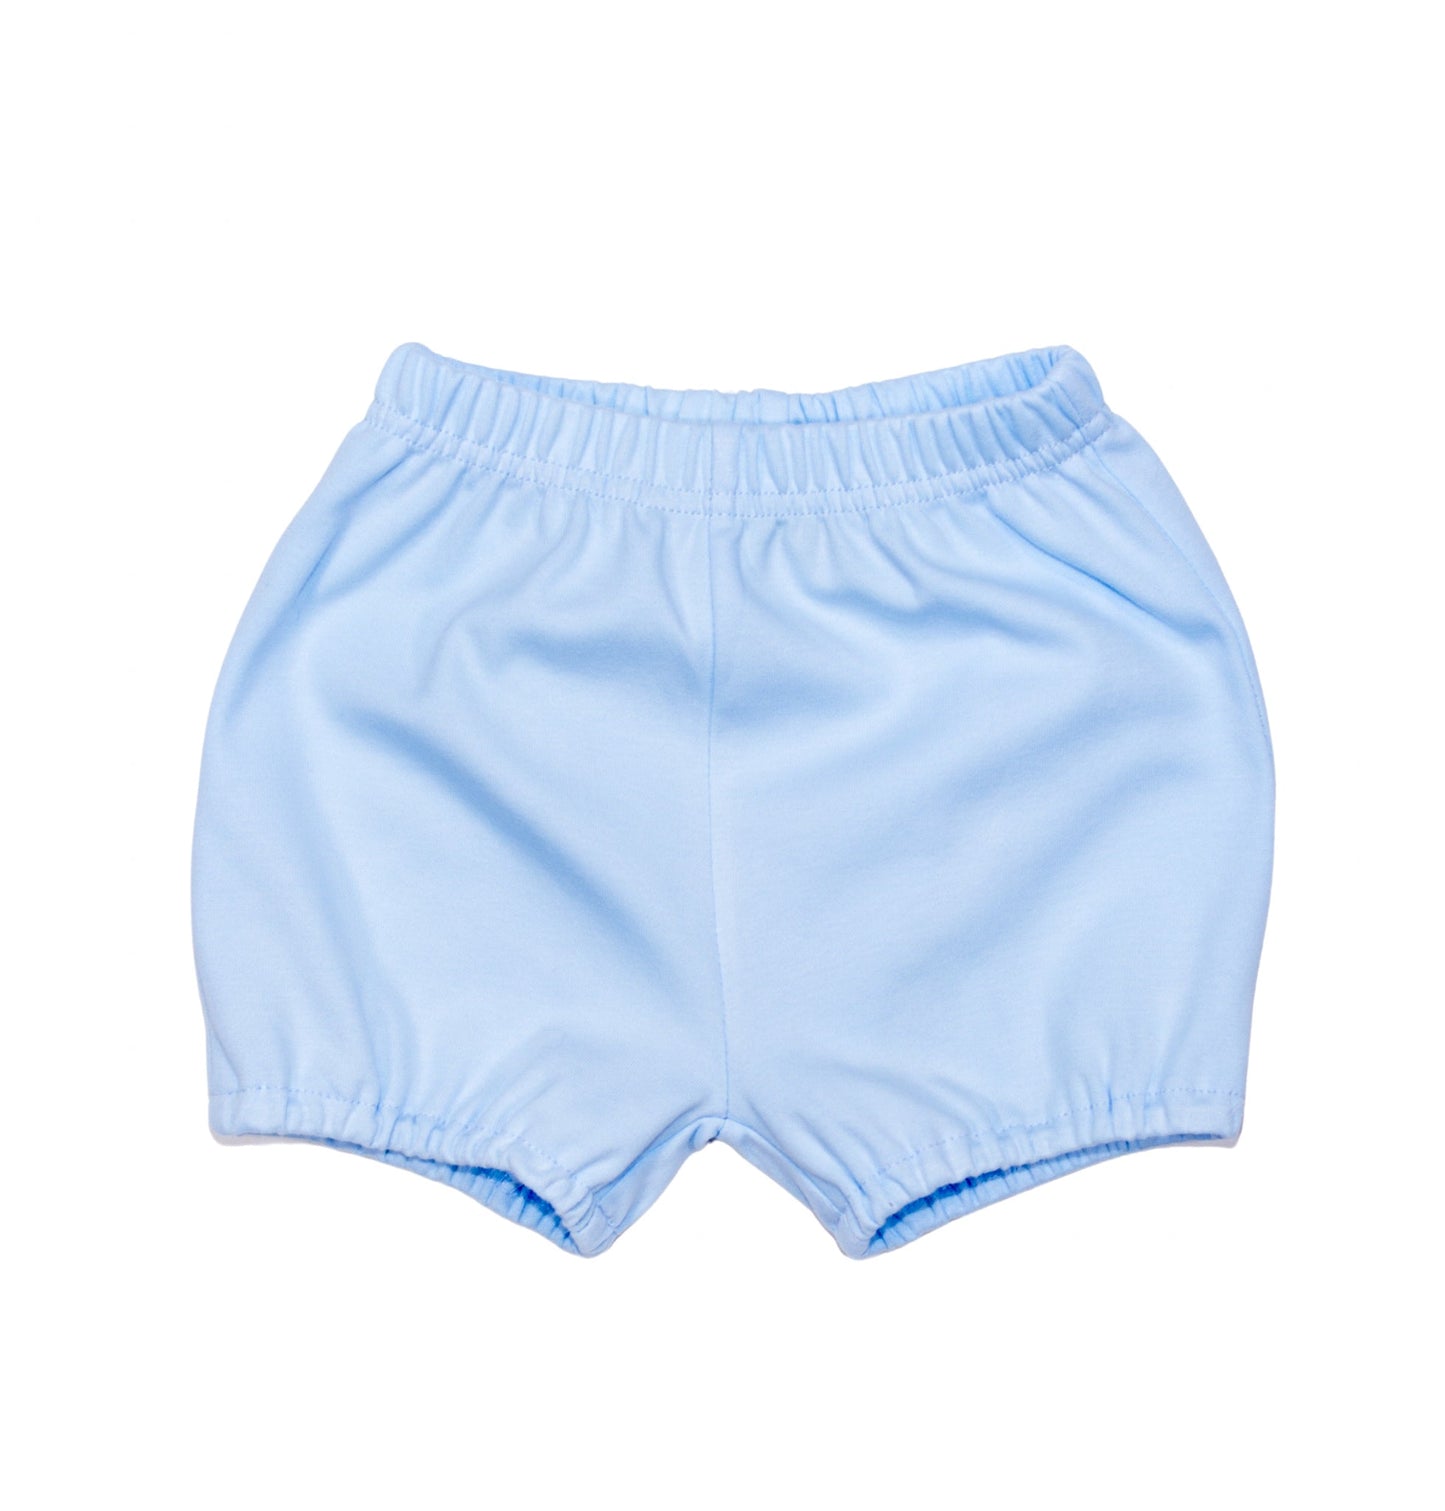 Solid Blue diaper cover - PREORDER*